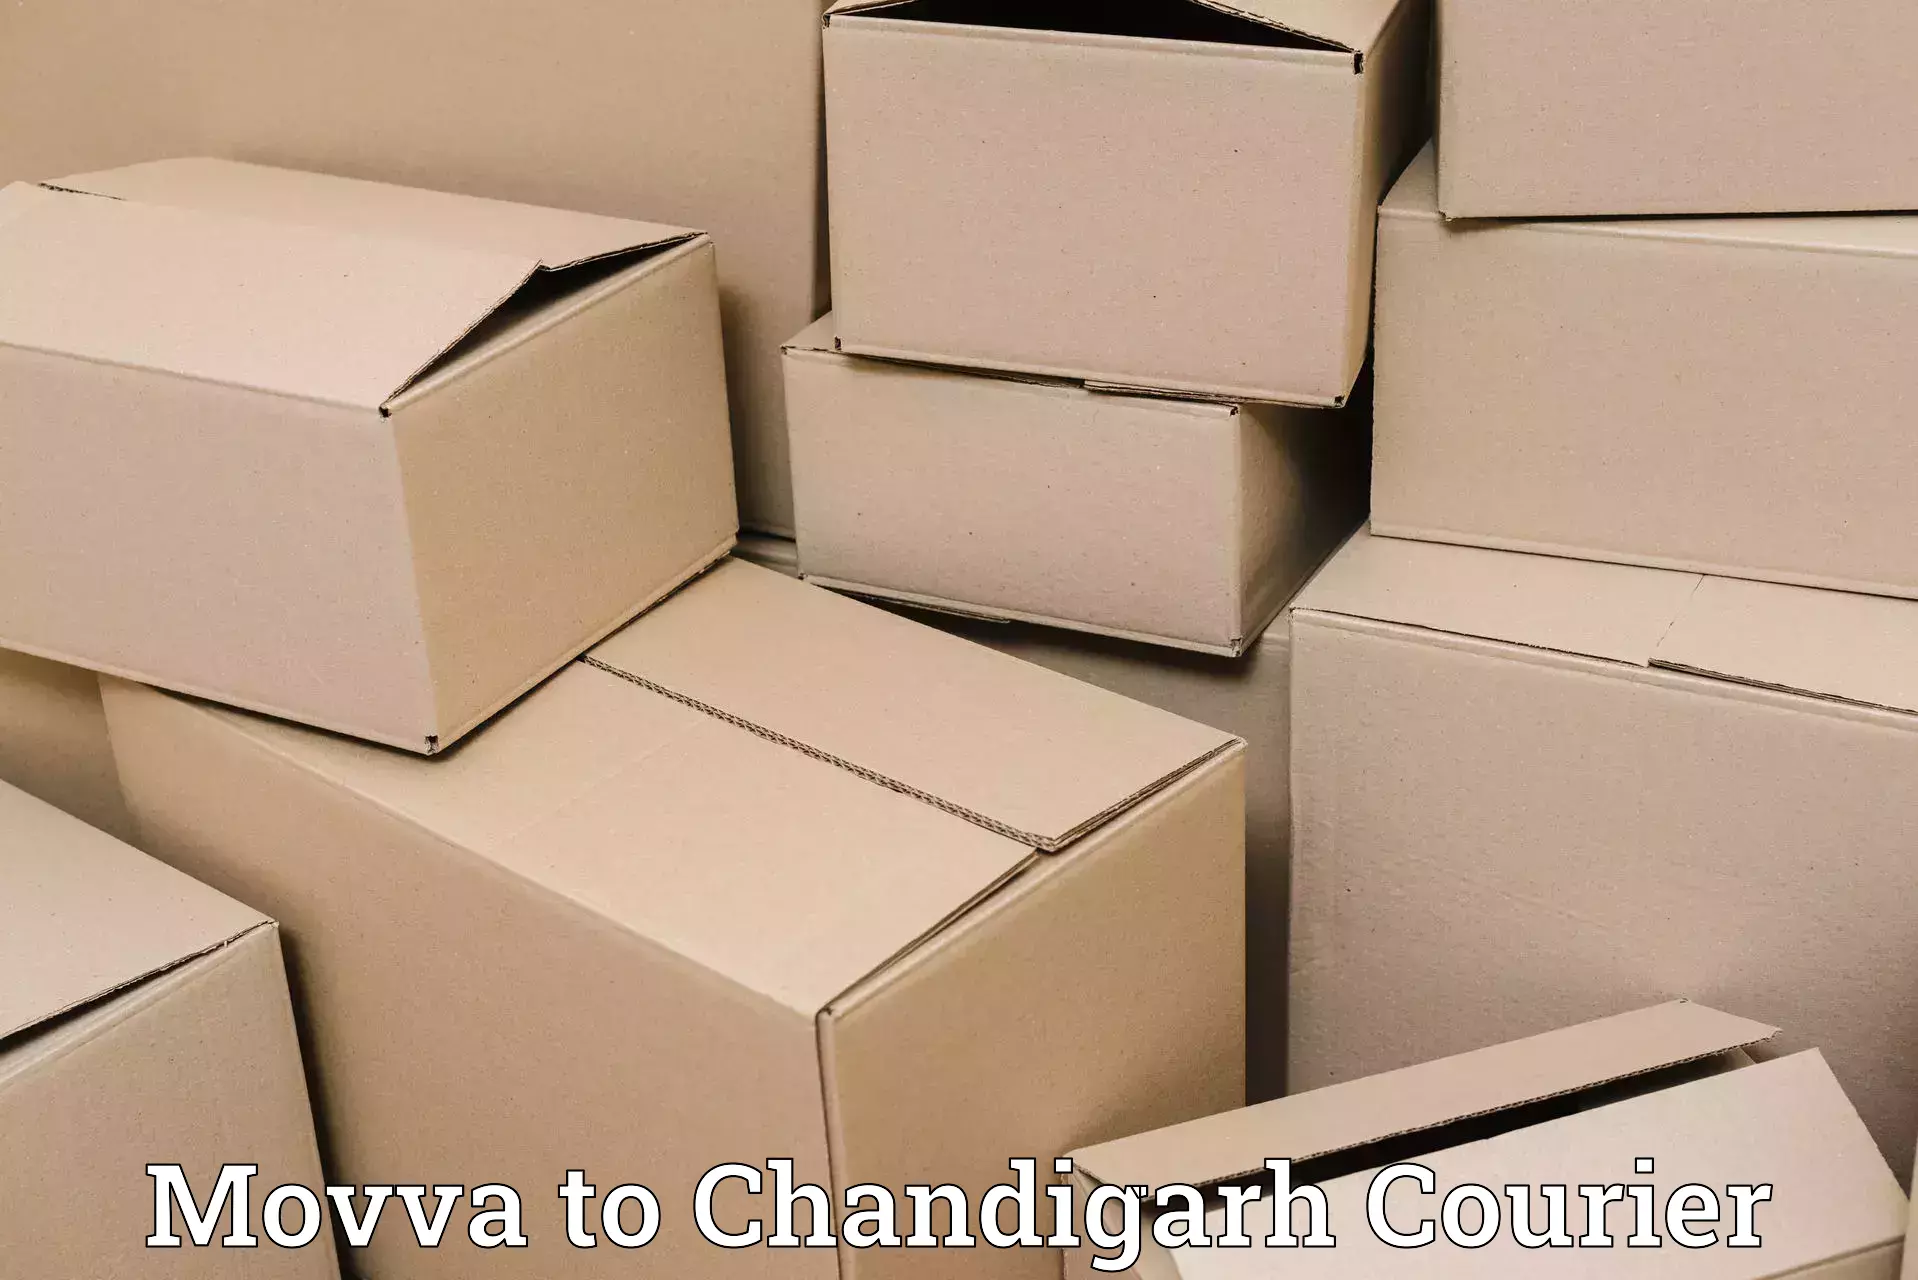 Fast parcel dispatch Movva to Chandigarh